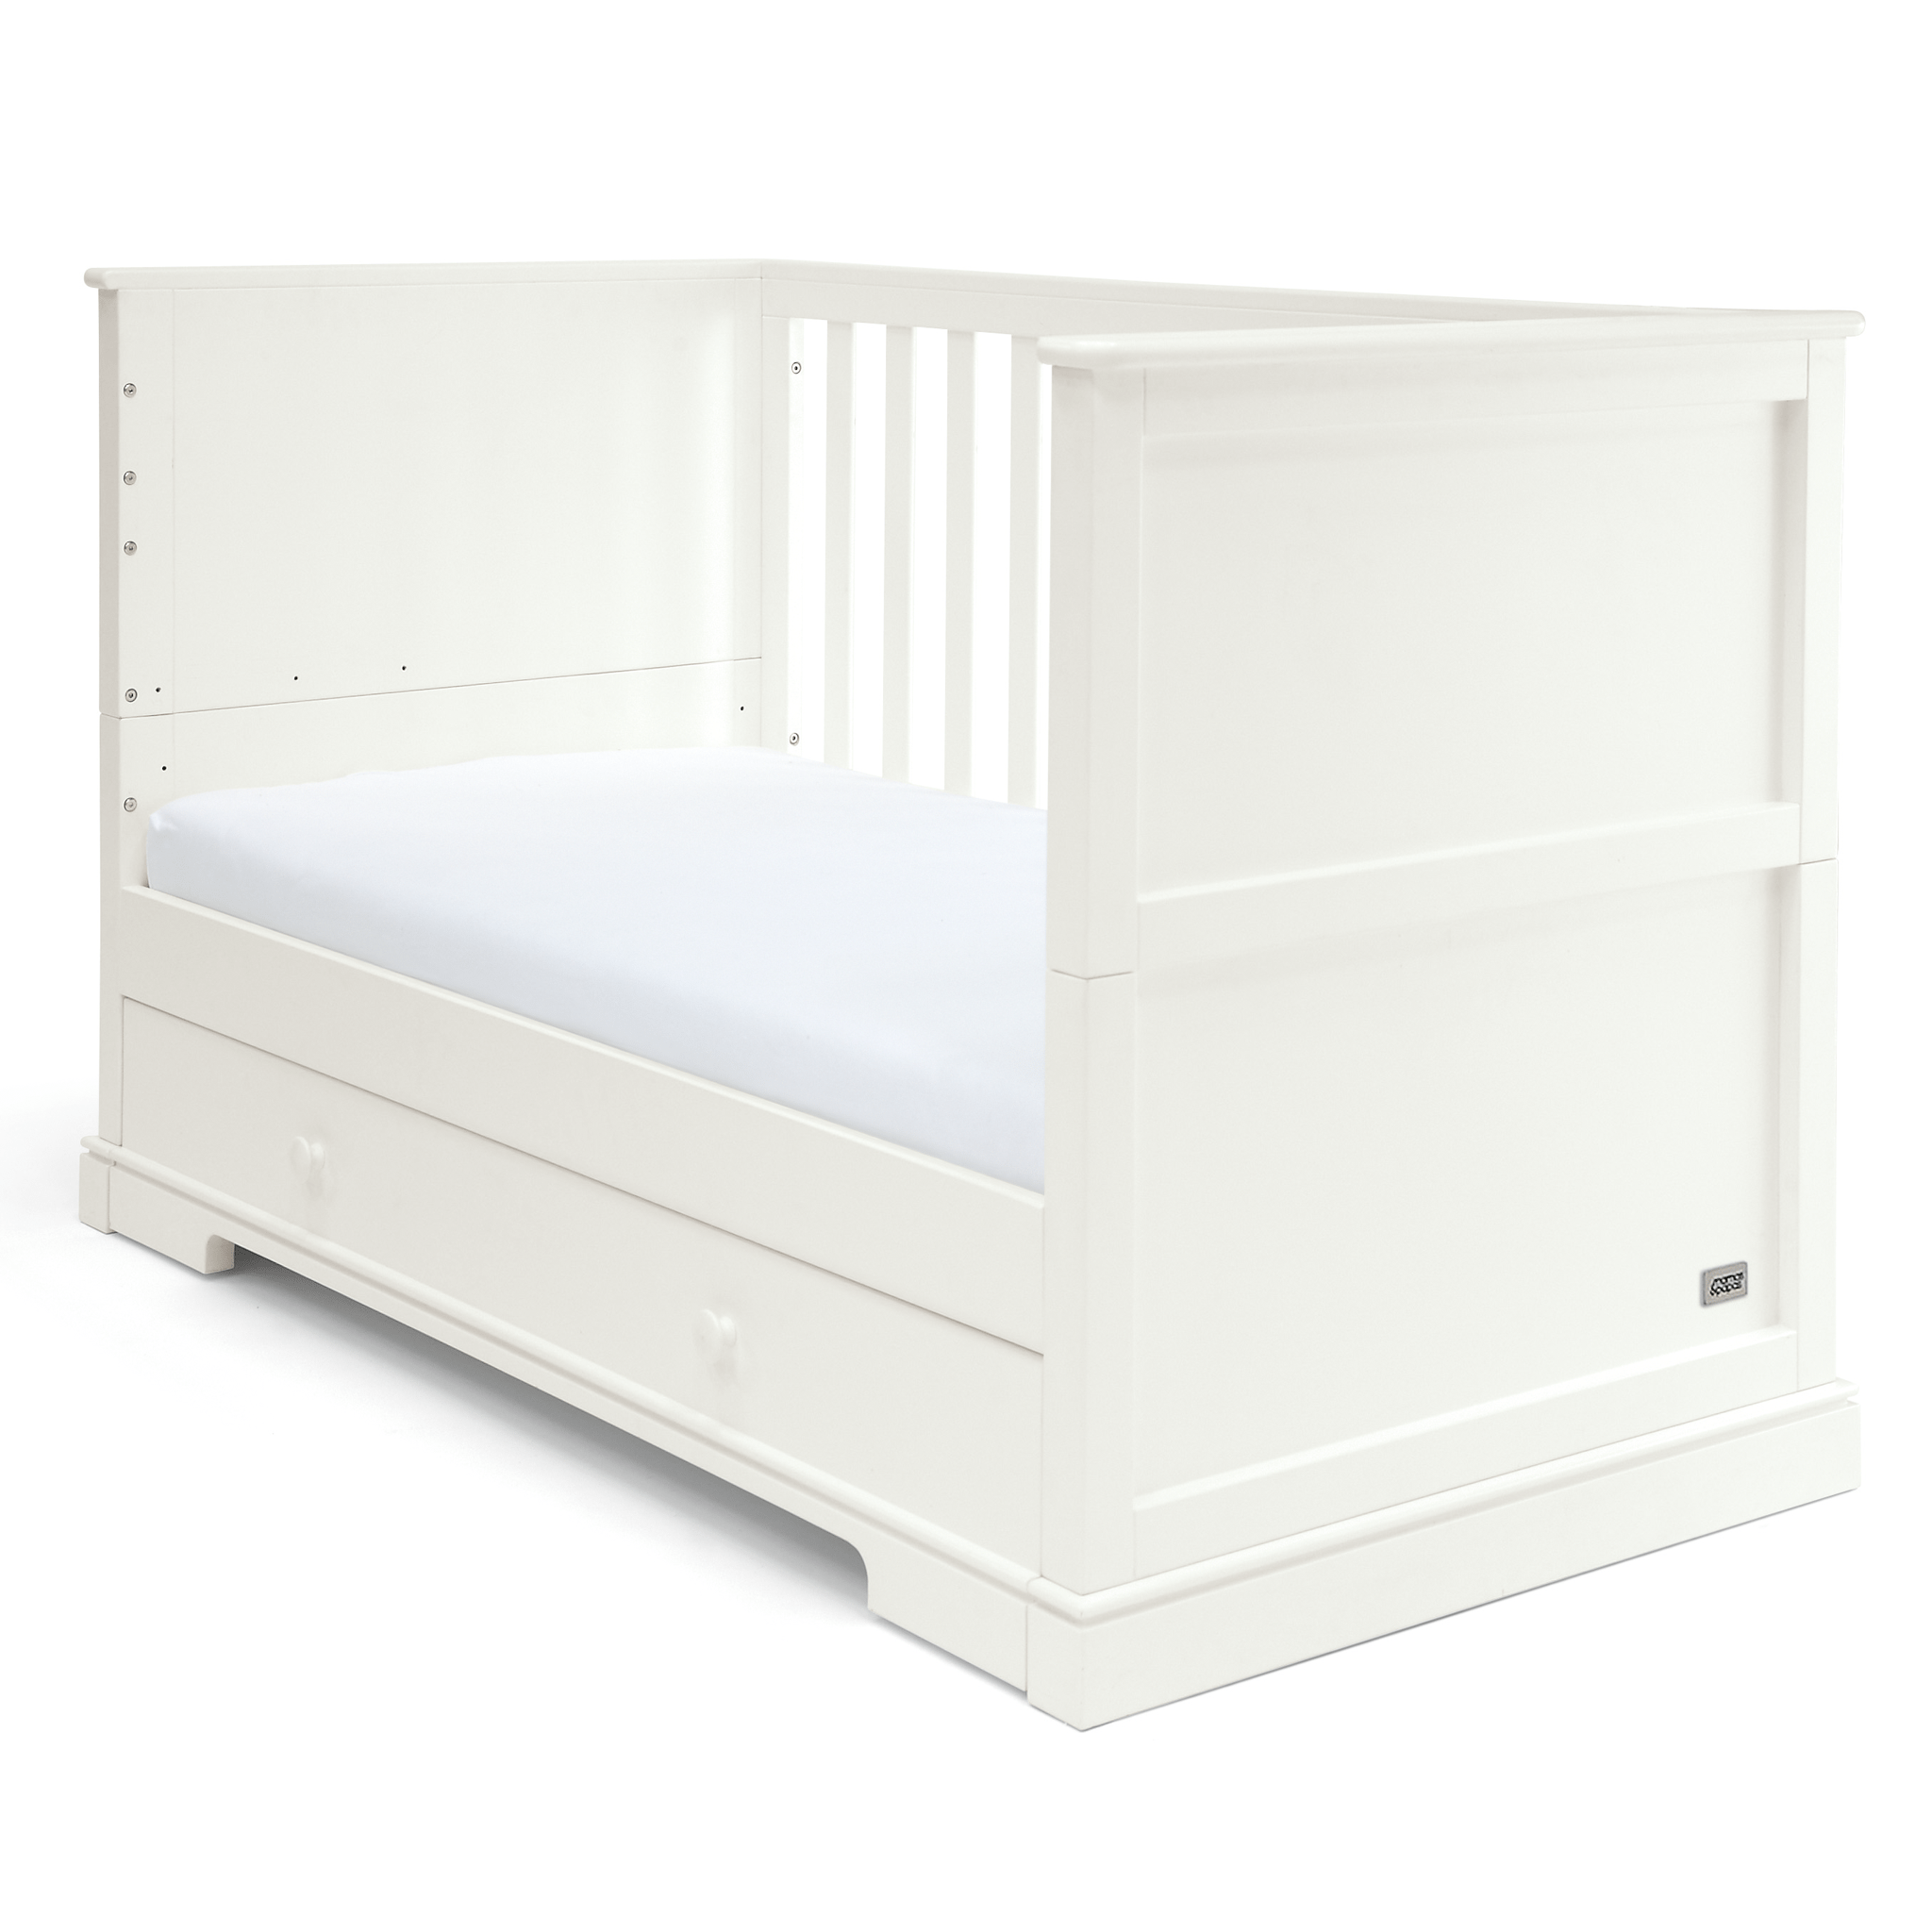 Mamas & Papas Oxford 2 Piece Cot Bed Roomset White